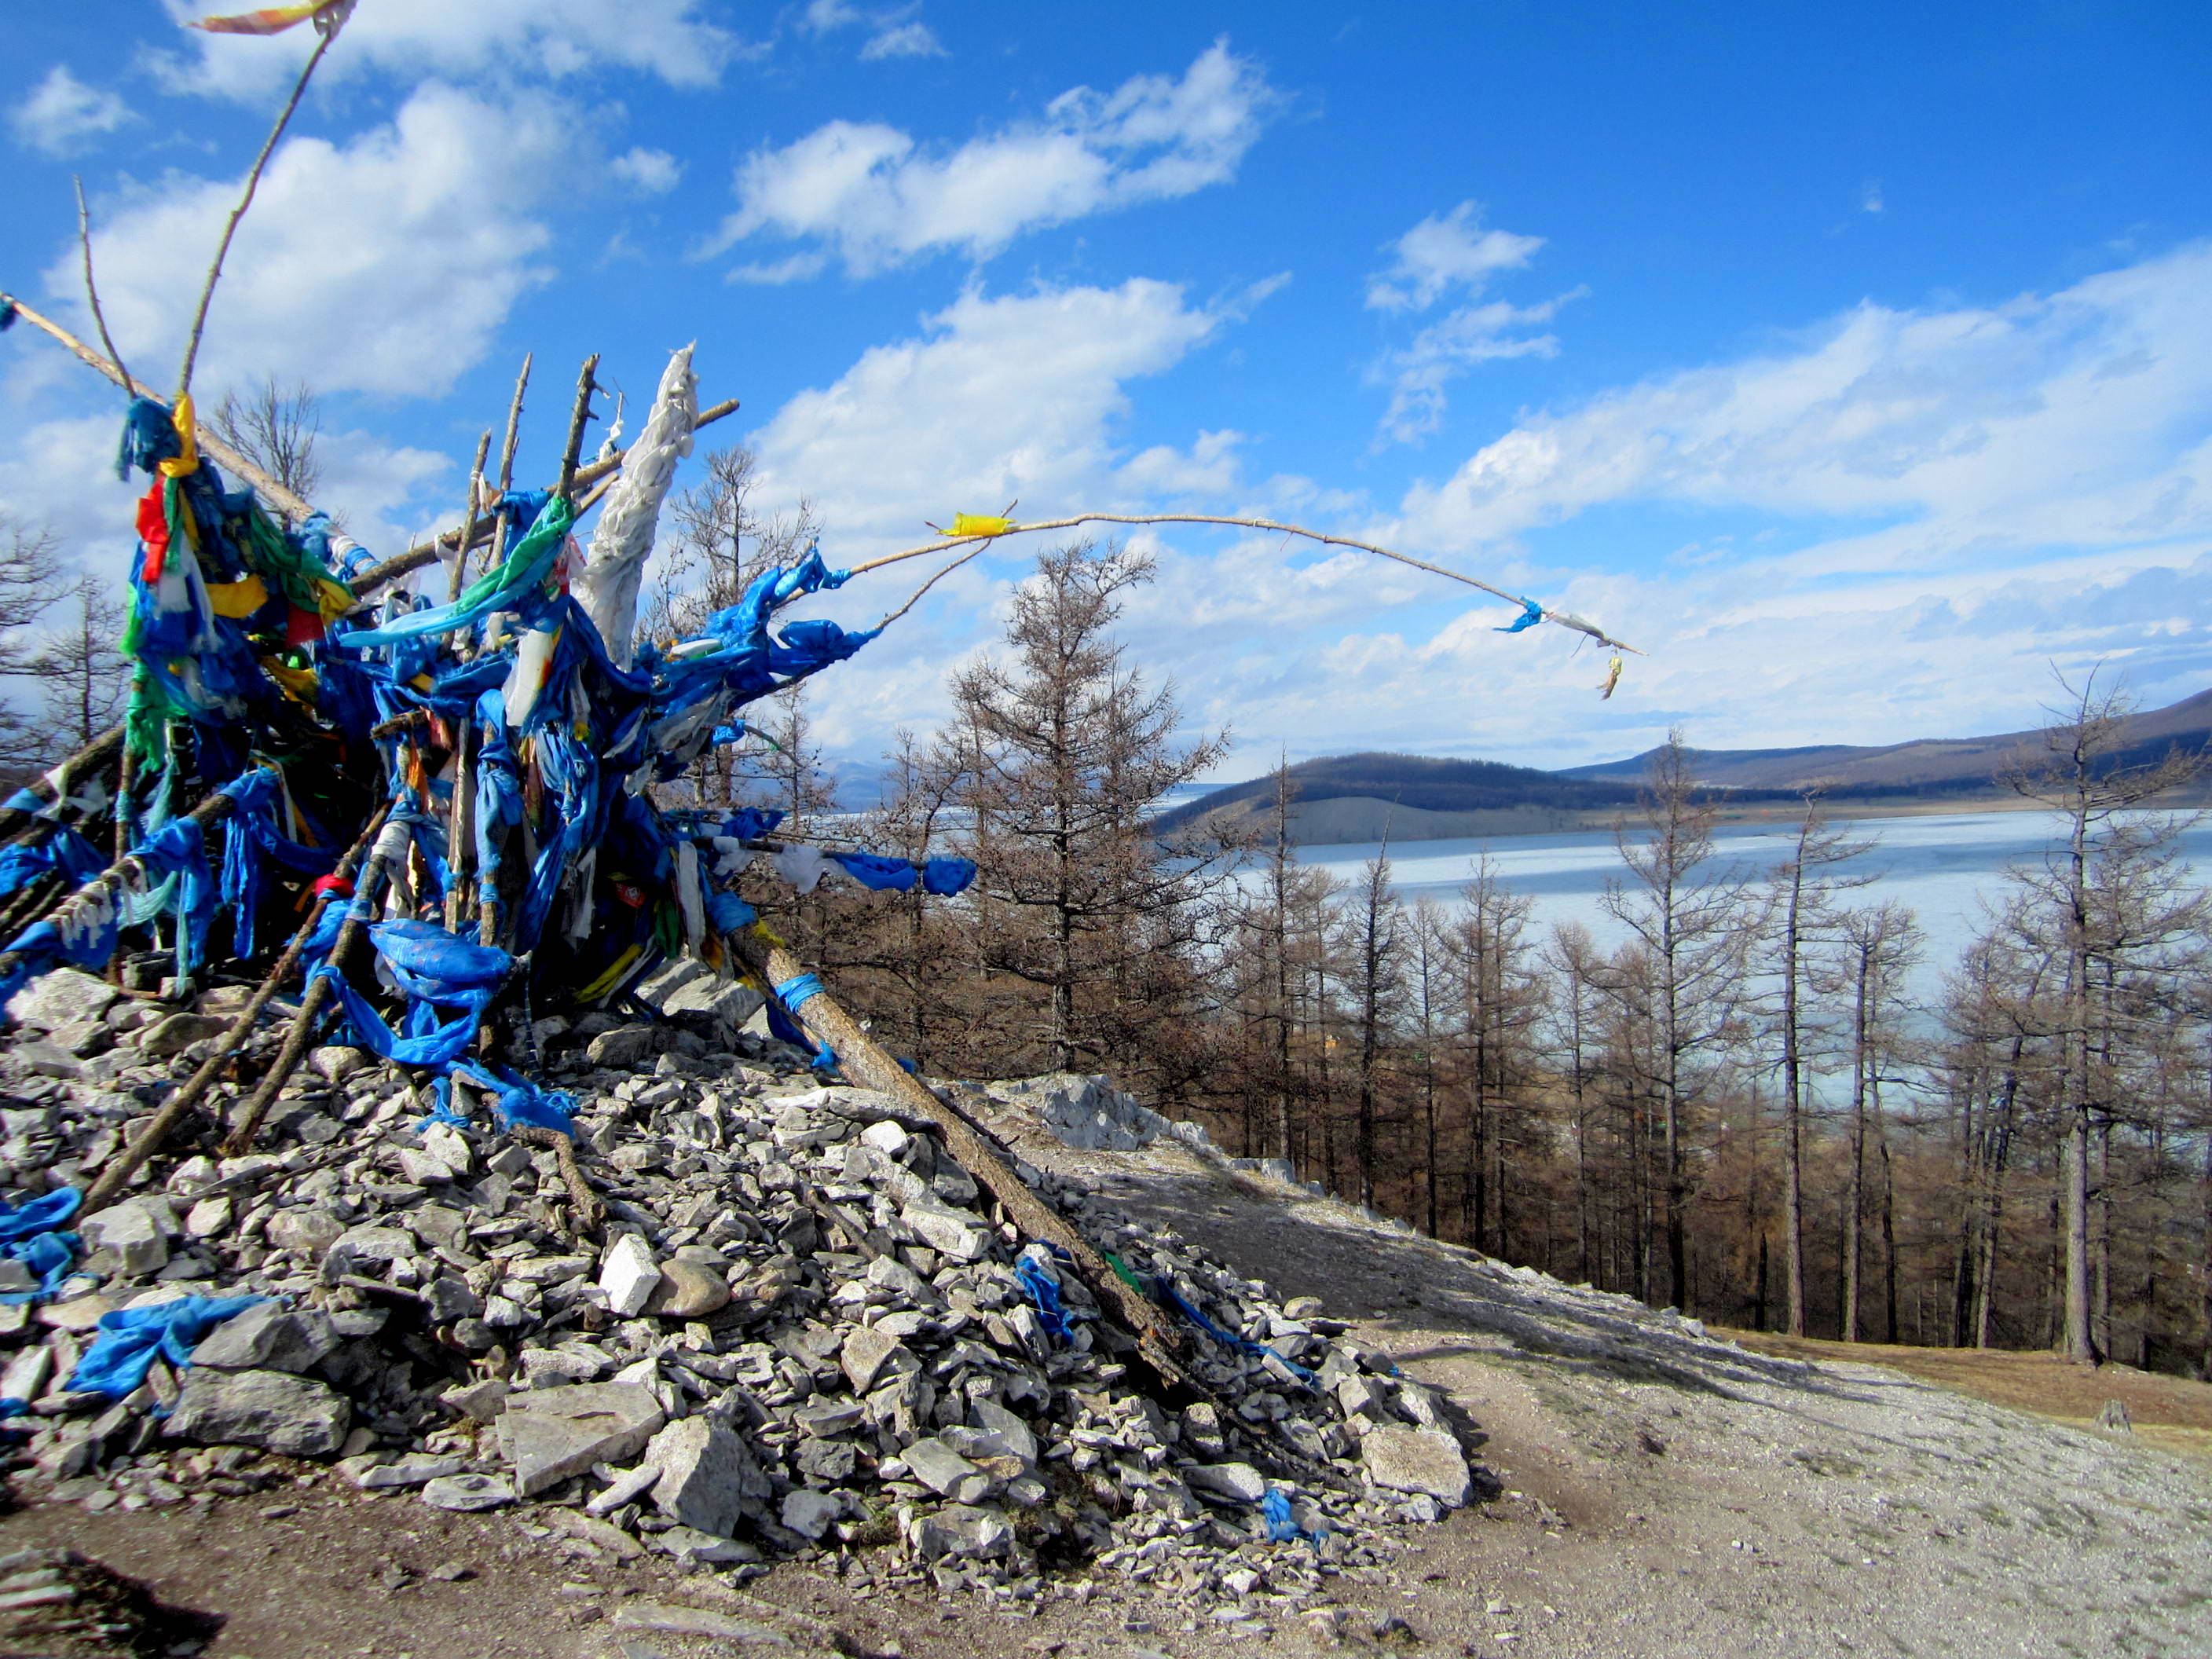 A traditional shrine, called an Ovoo. This one is at the top of a hill overlooking Khatgal and Lake Khövsgöl.